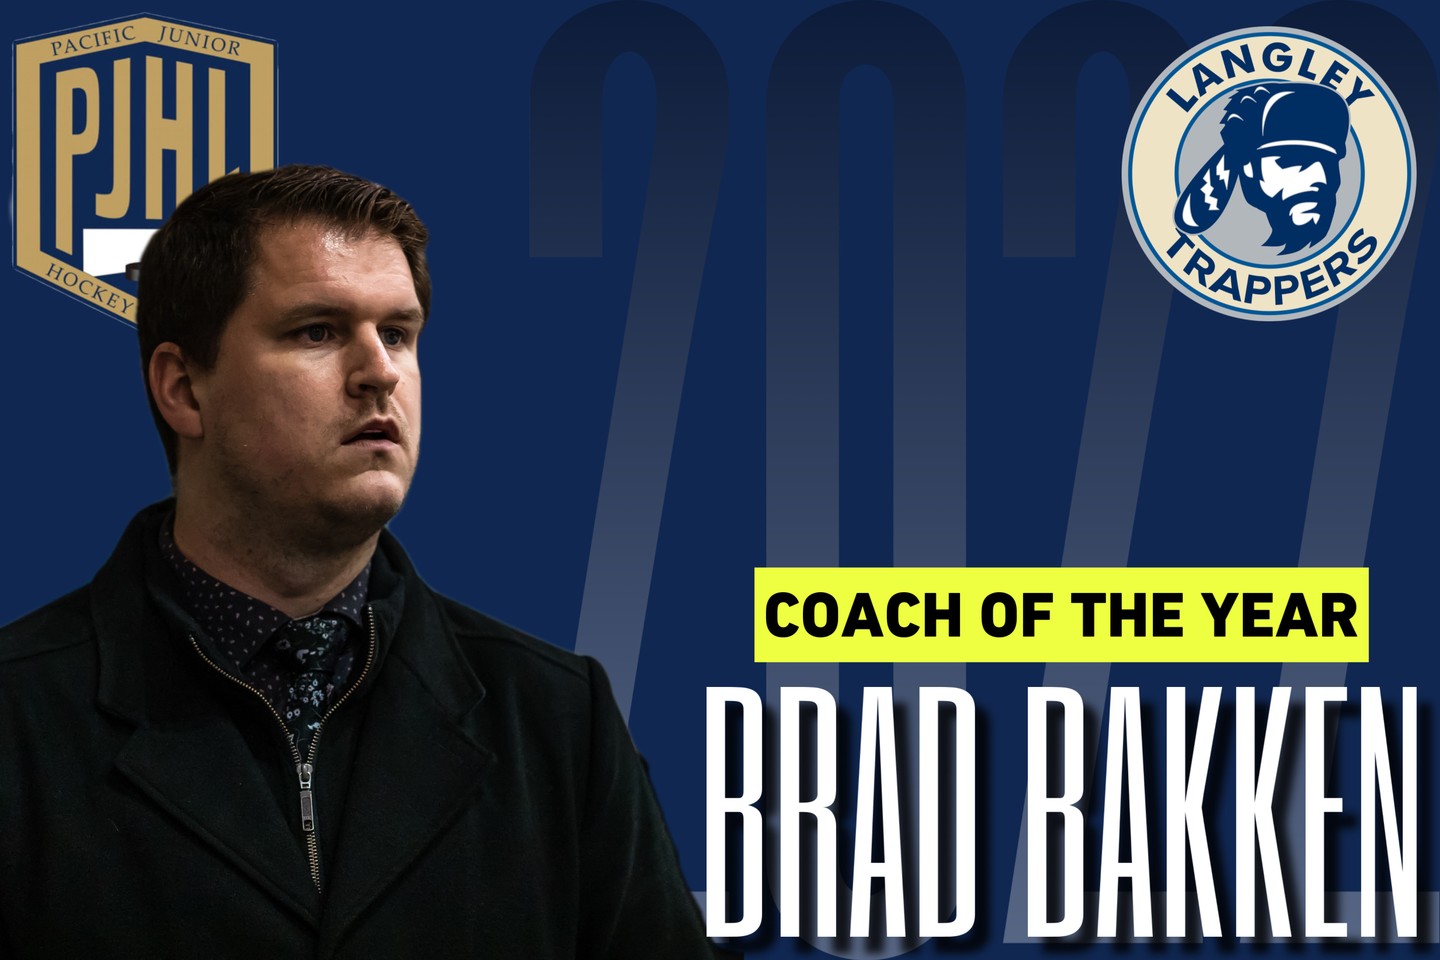 Congratulations to Brad Bakken of the @langleytrappers who has been voted PJHL Coach of the Year #PJHLBC. Brad led the Trappers to a regular season championship, Stonehouse Cup and Cyclone Taylor Cup Championship @davidstevens.photo